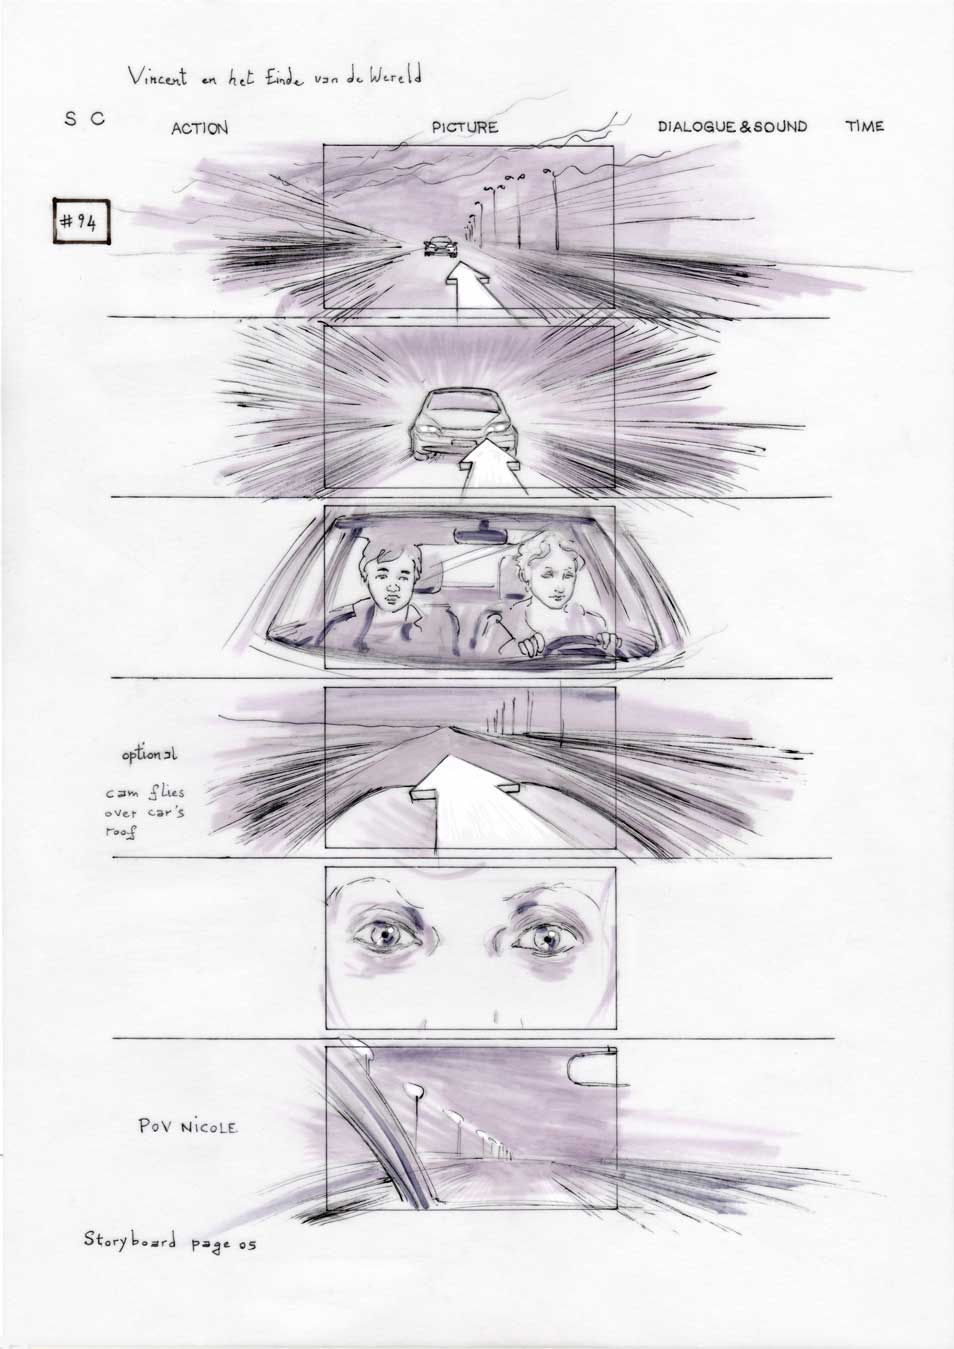 Vincent and the End of the World storyboard 05